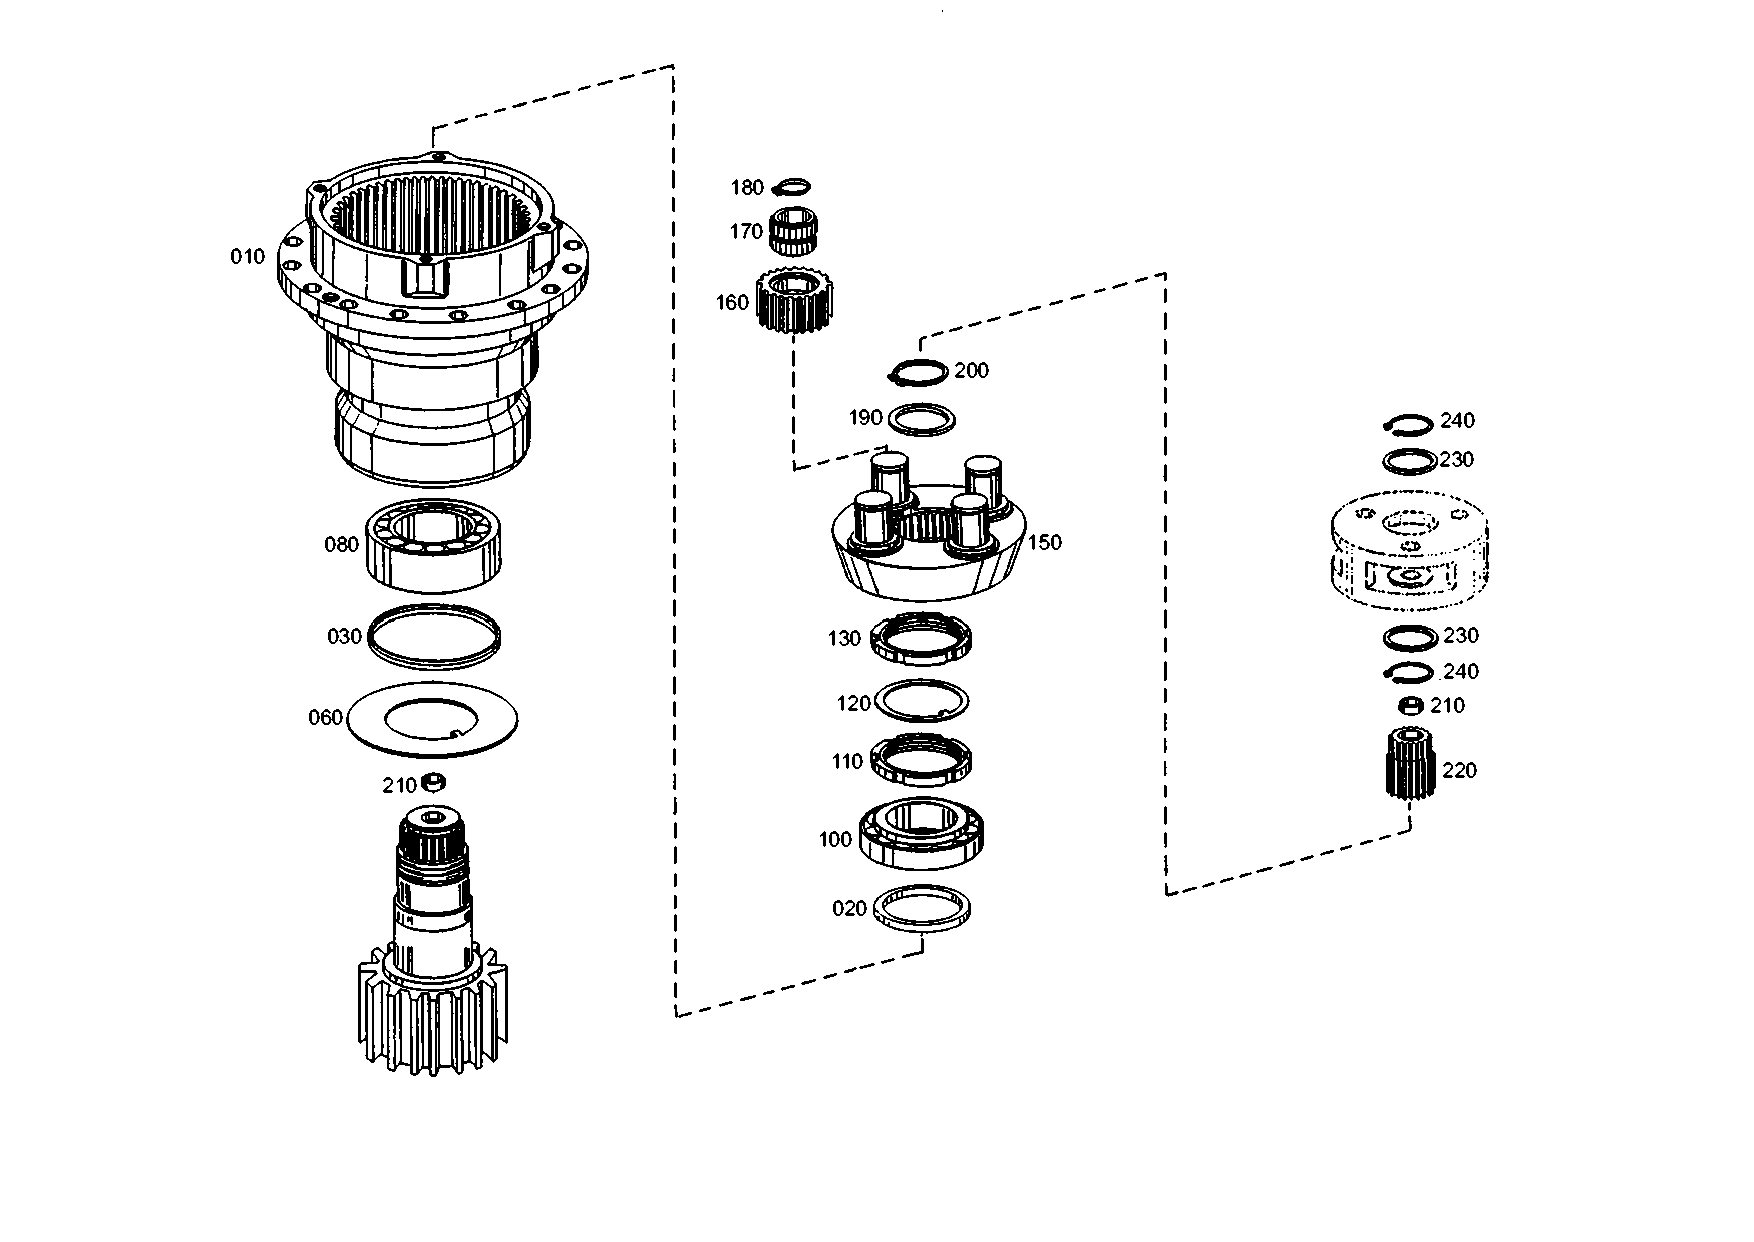 drawing for FUCHS-BAGGER GMBH + CO.KG 5904658875 - ROLLER BEARING (figure 3)